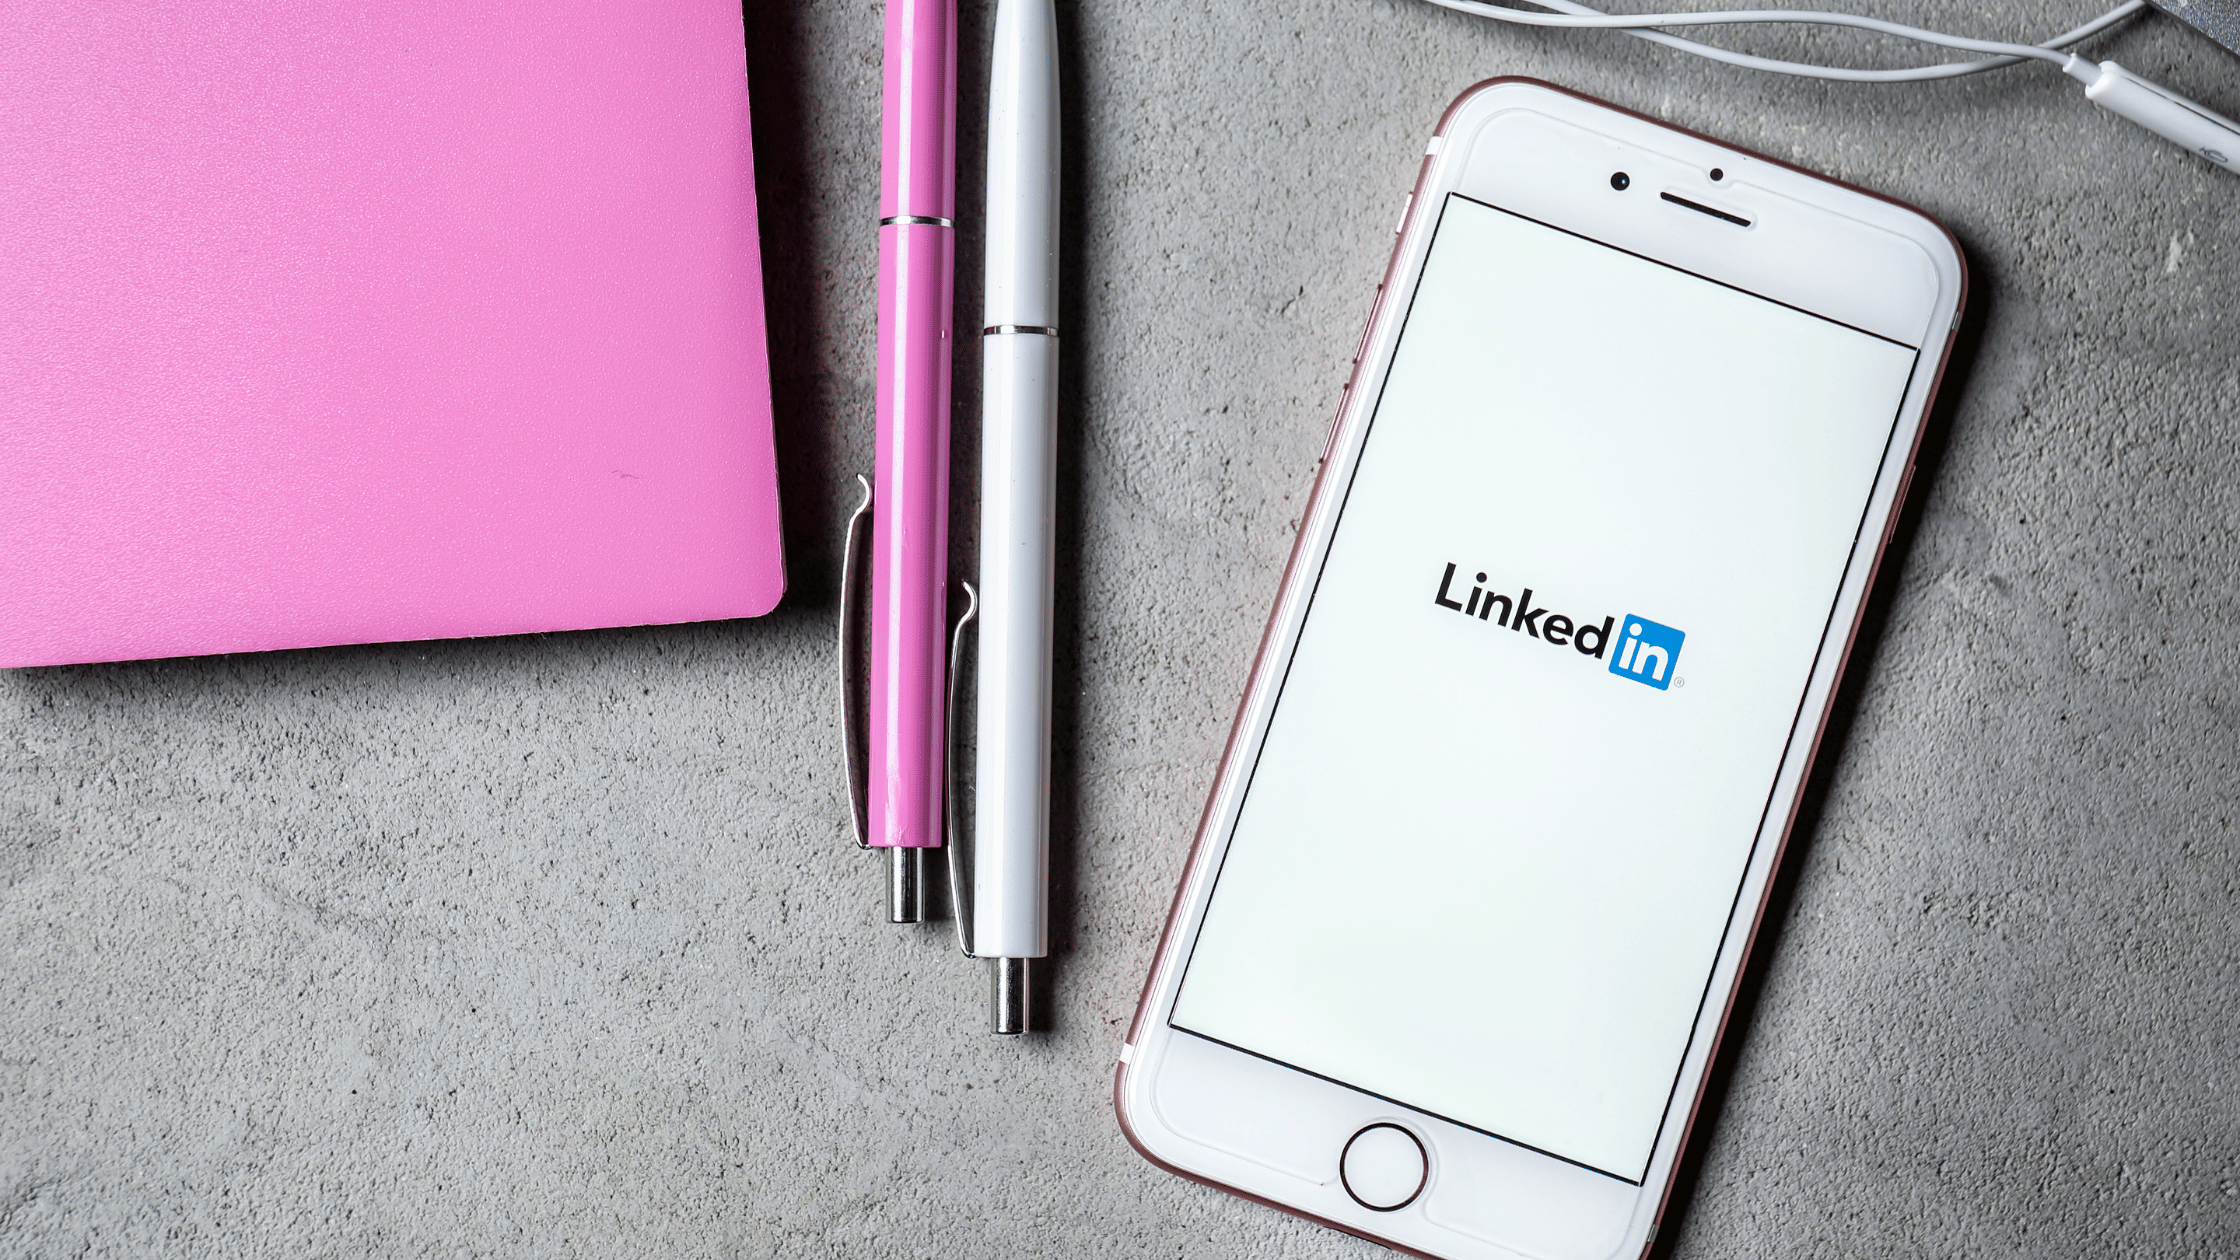 Getting started with B2B LinkedIn Ads, with best practices